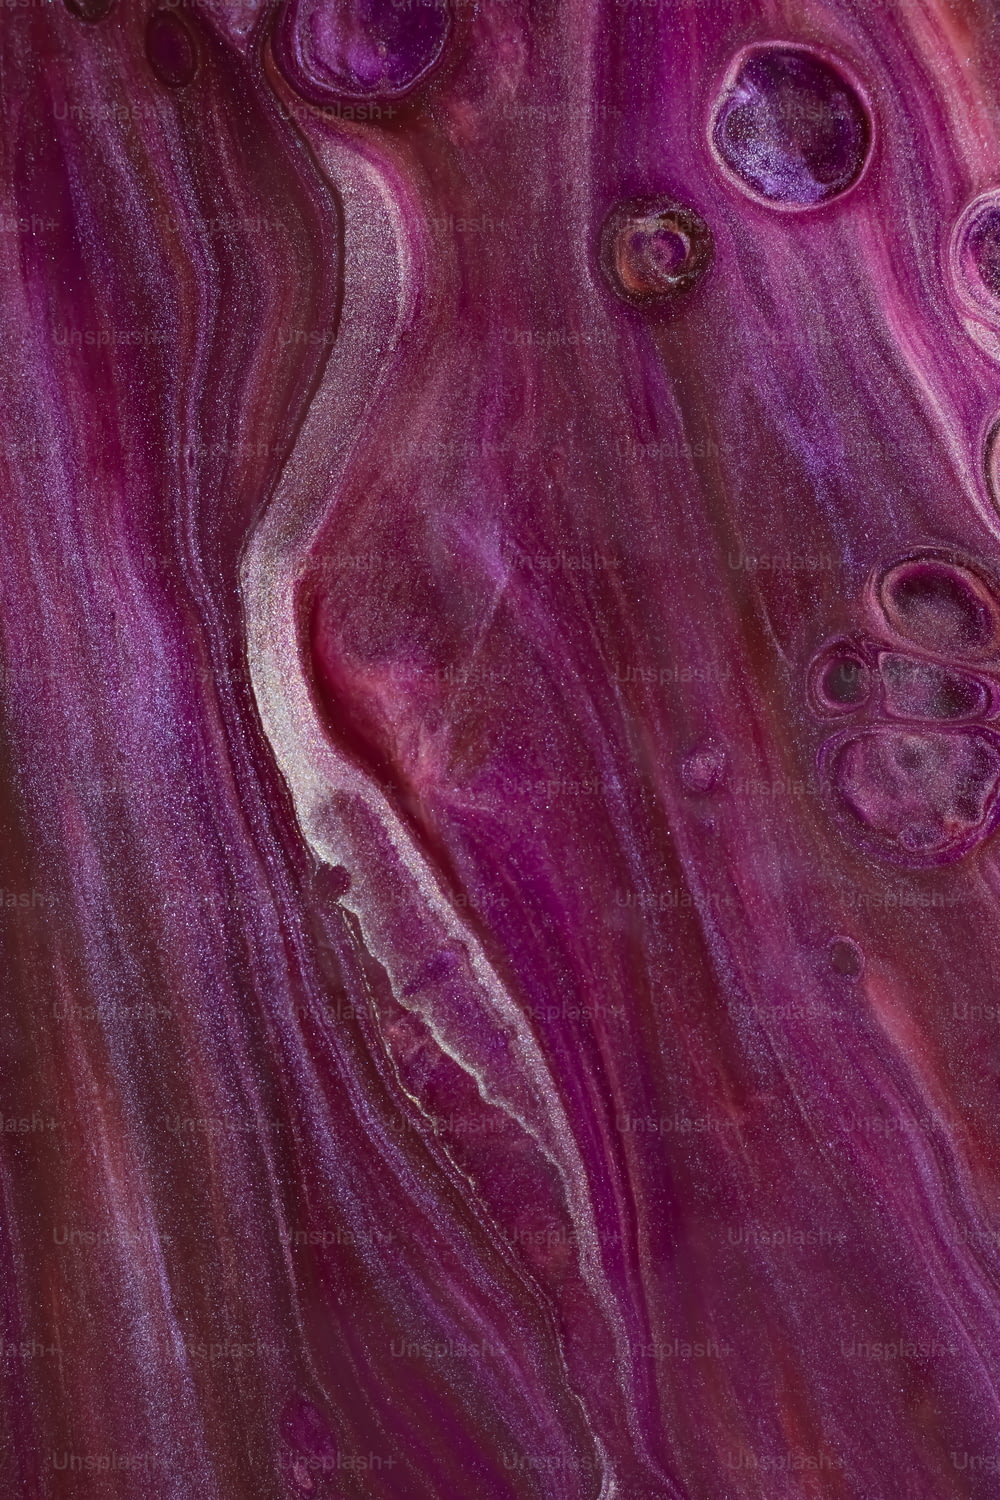 a close up of a purple and white marble